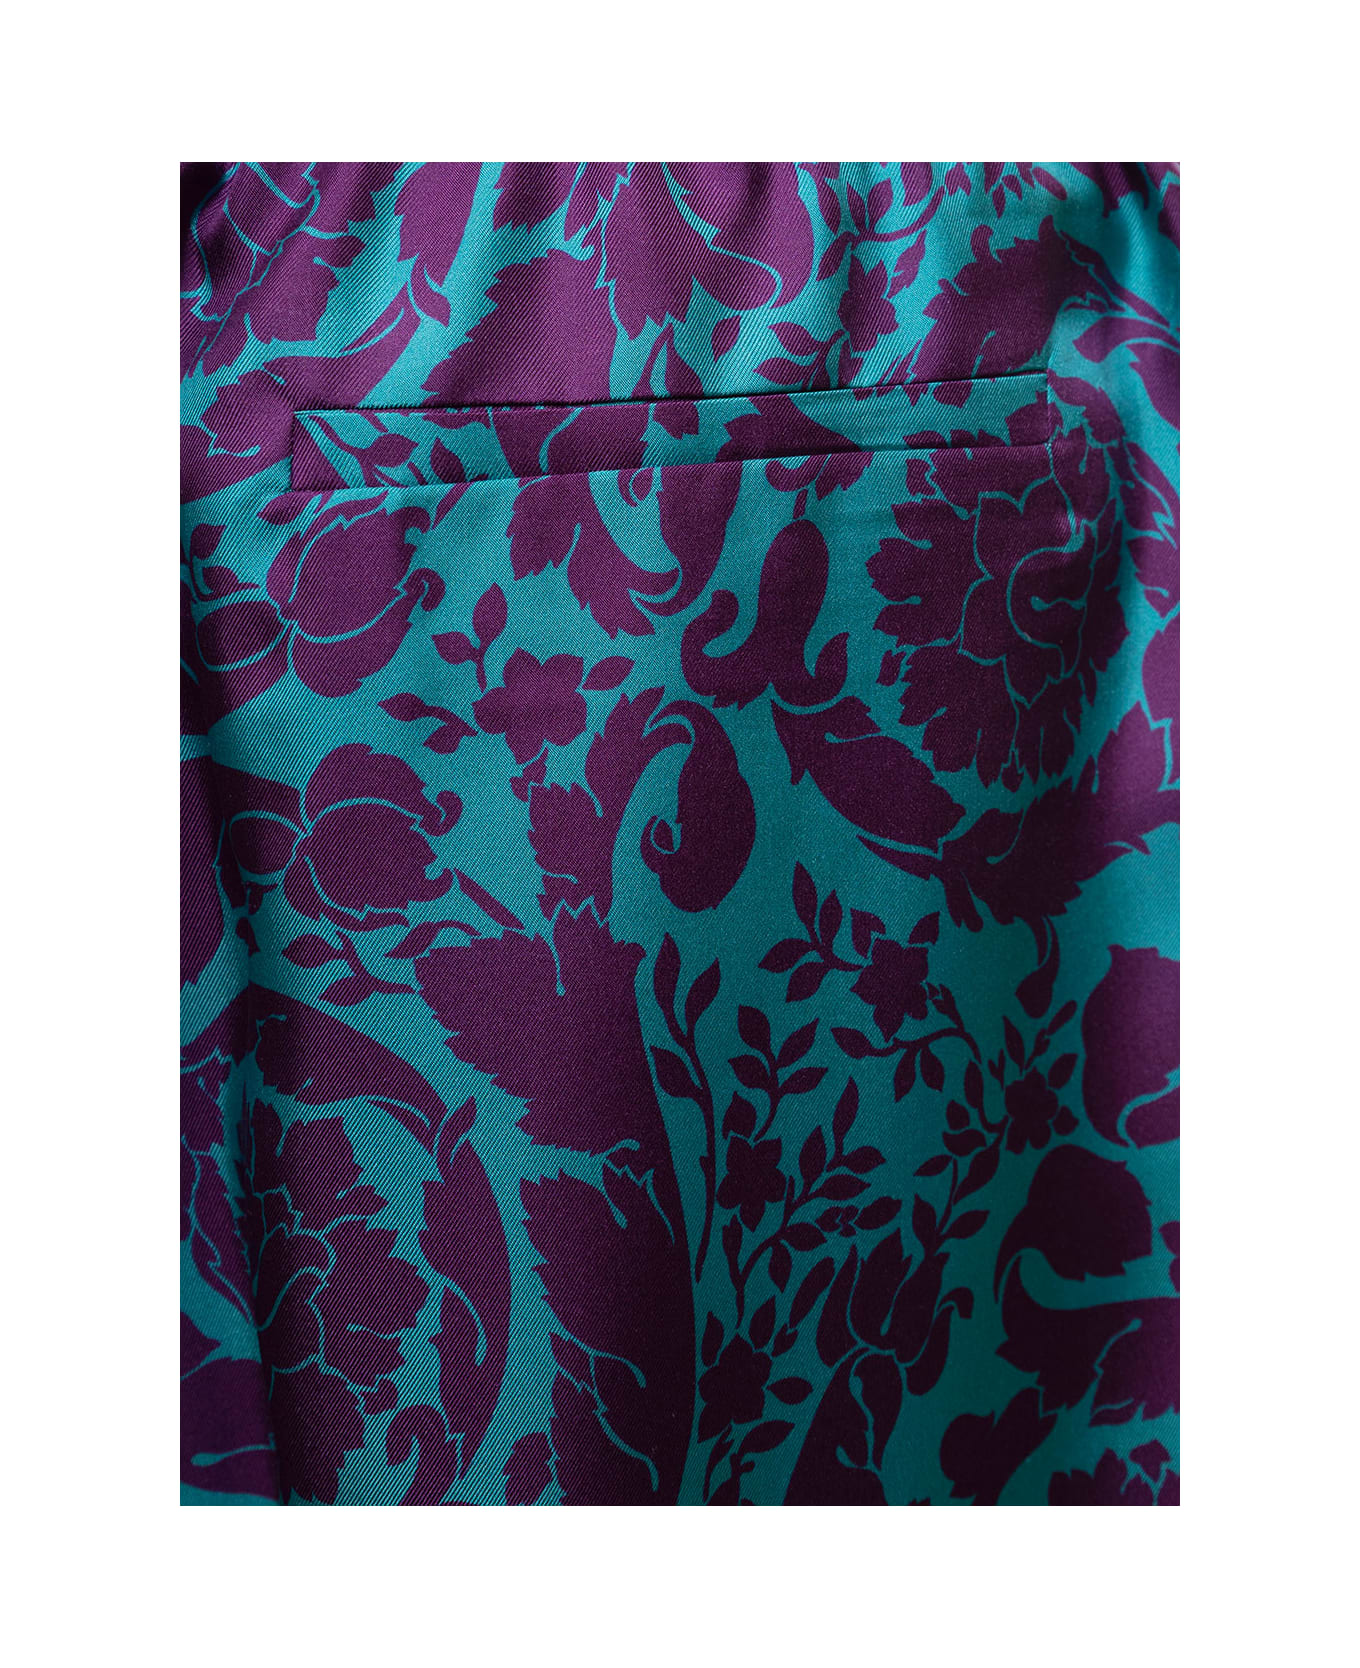 Versace Purple And Light Blue Bermuda In Silk Satin With Allover Barocco Pattern Versace Man - Violet